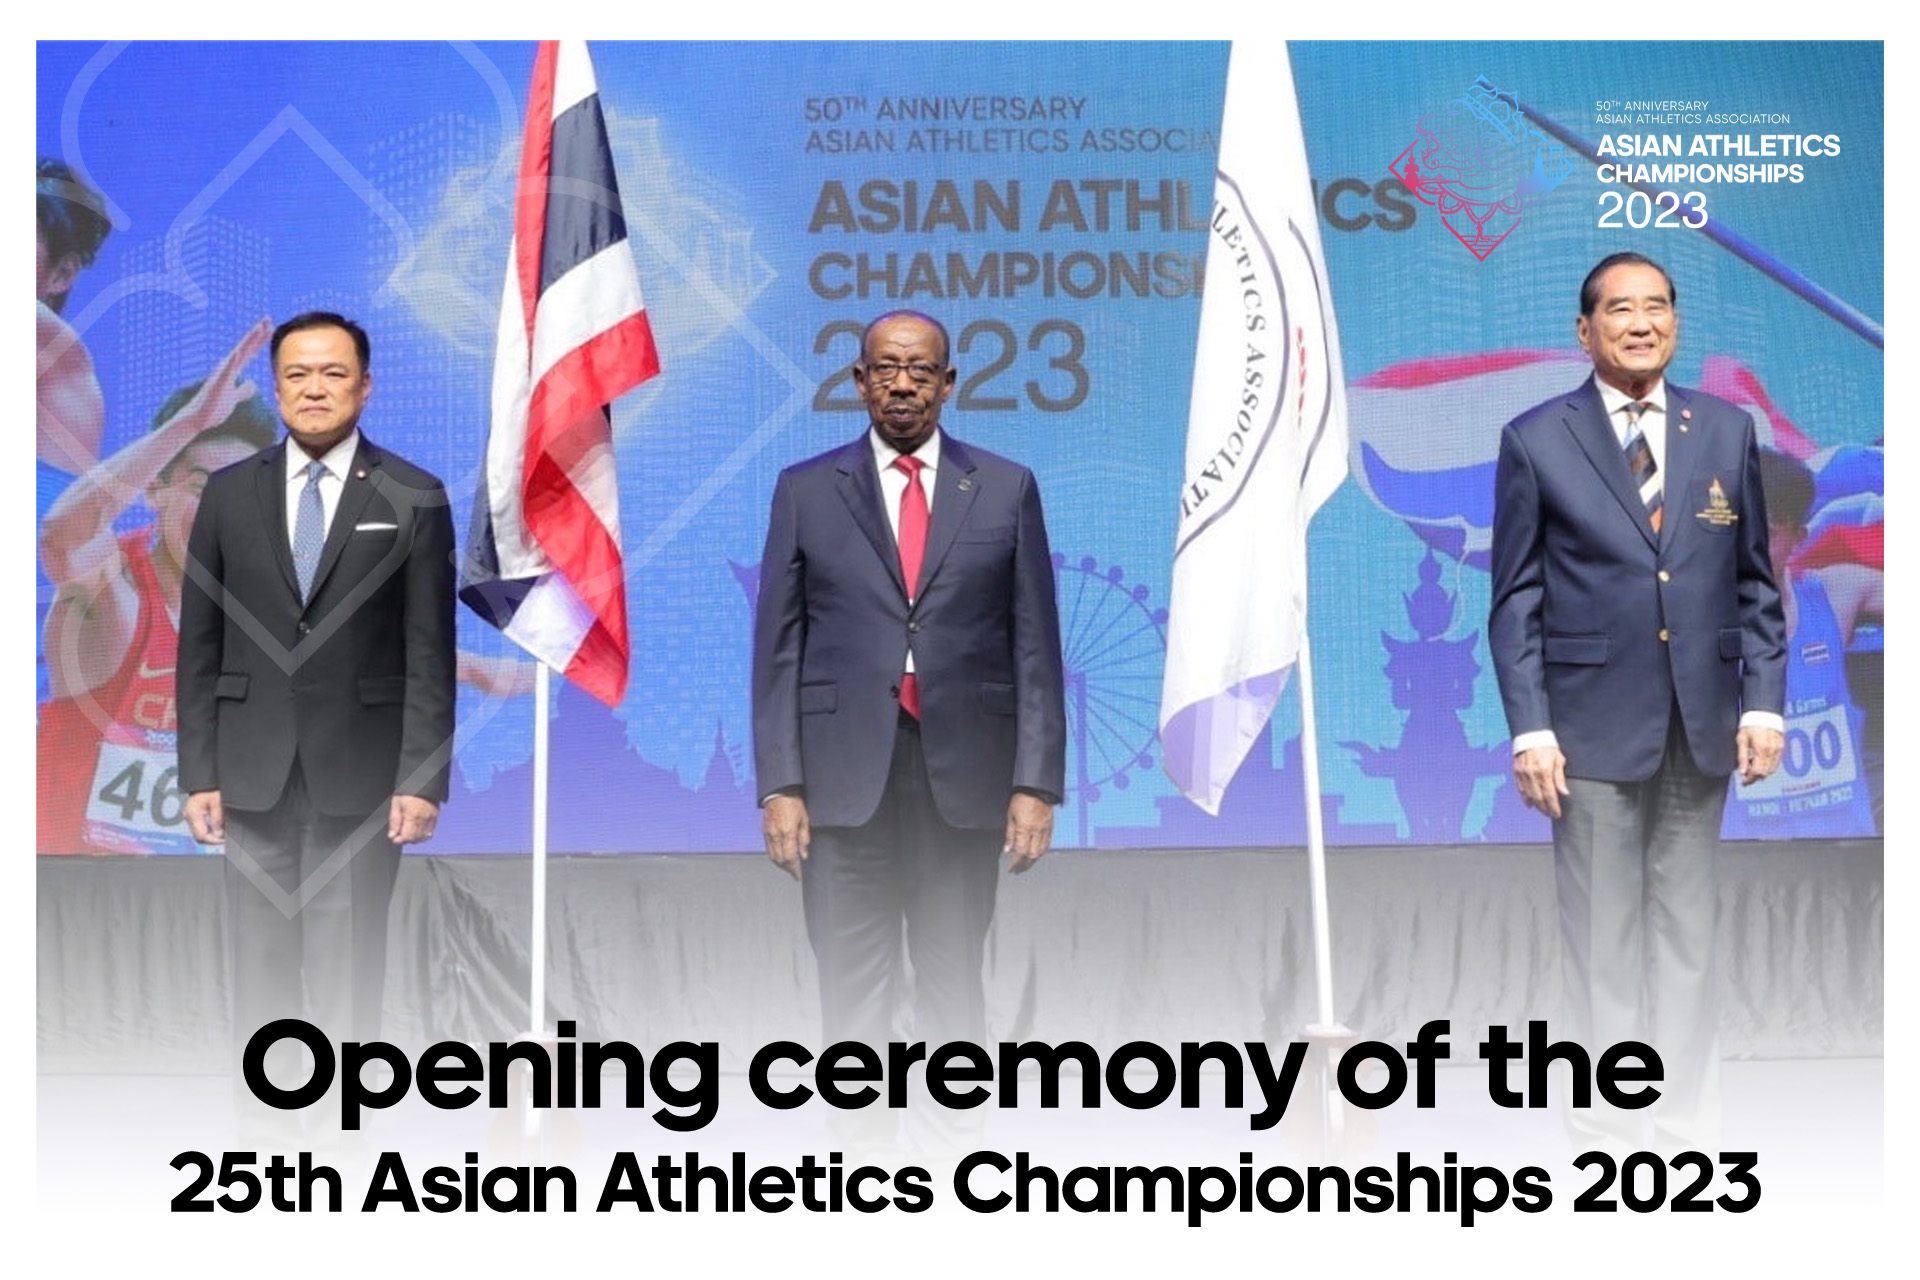 Opening ceremony of the “25th Asian Athletics Championships 2023”